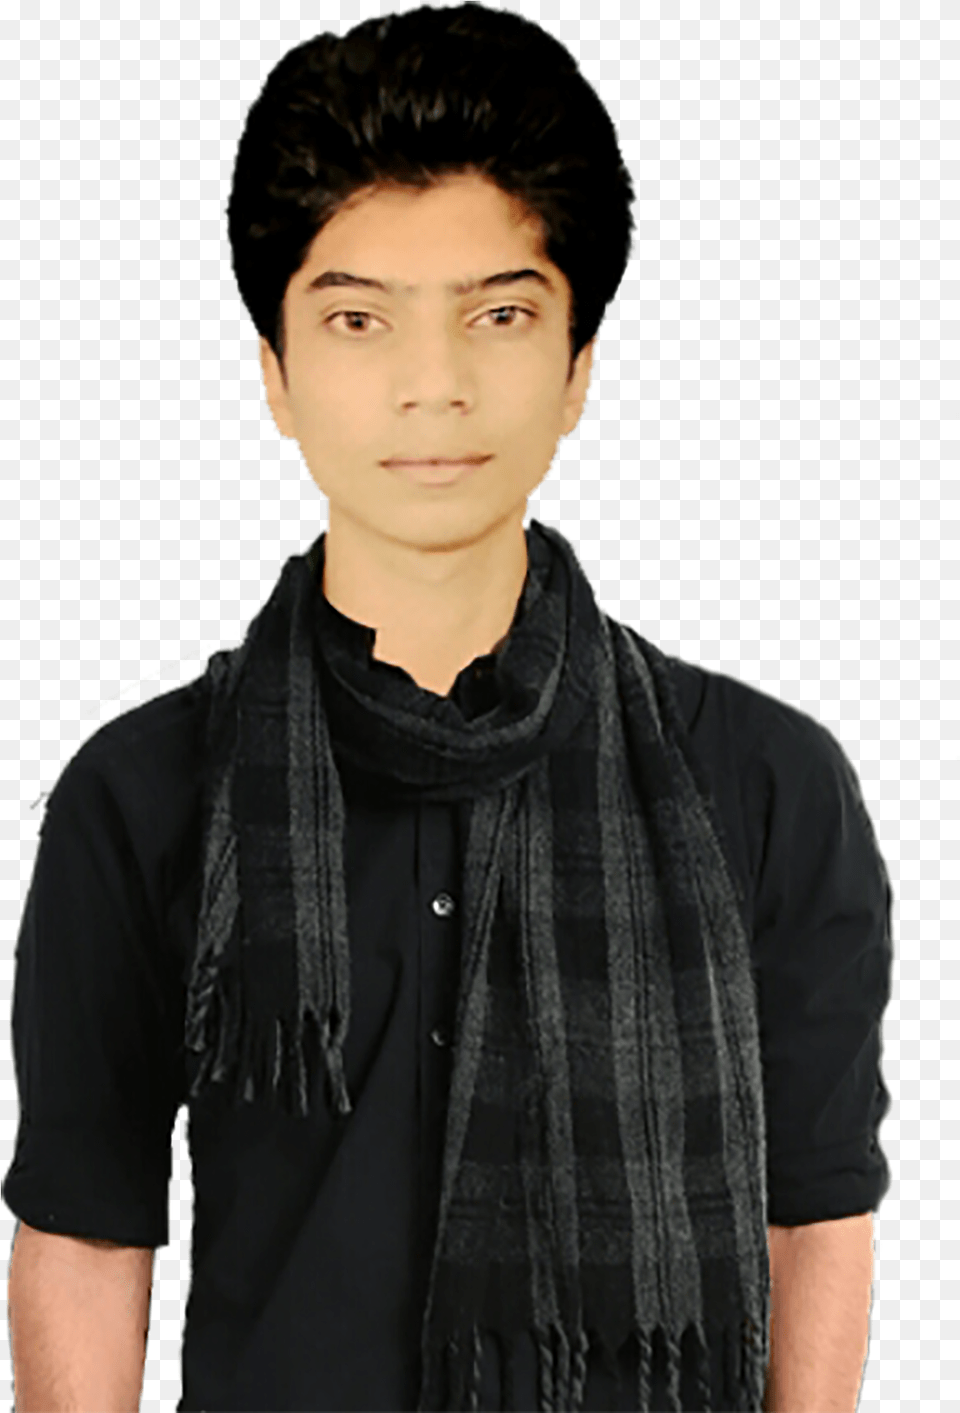 Dhruv Joshi Scarf, Clothing, Stole, Boy, Person Png Image